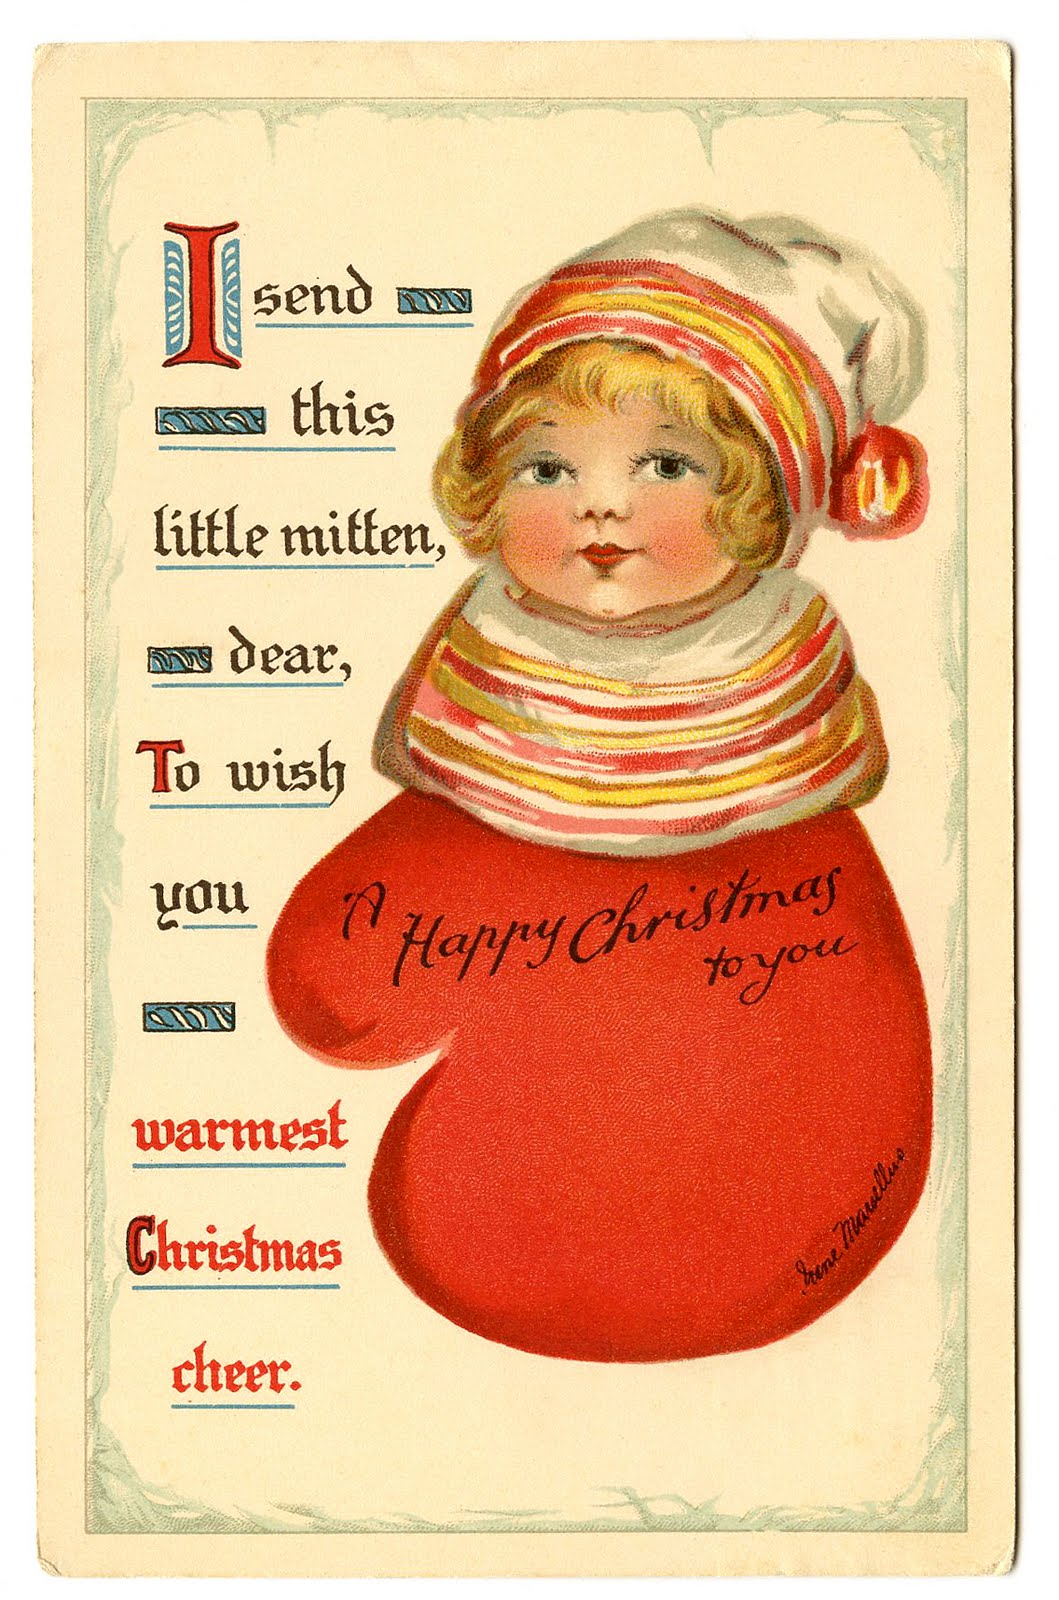 Vintage Christmas Clip Art   Darling Little Mitten Girl   The Graphics